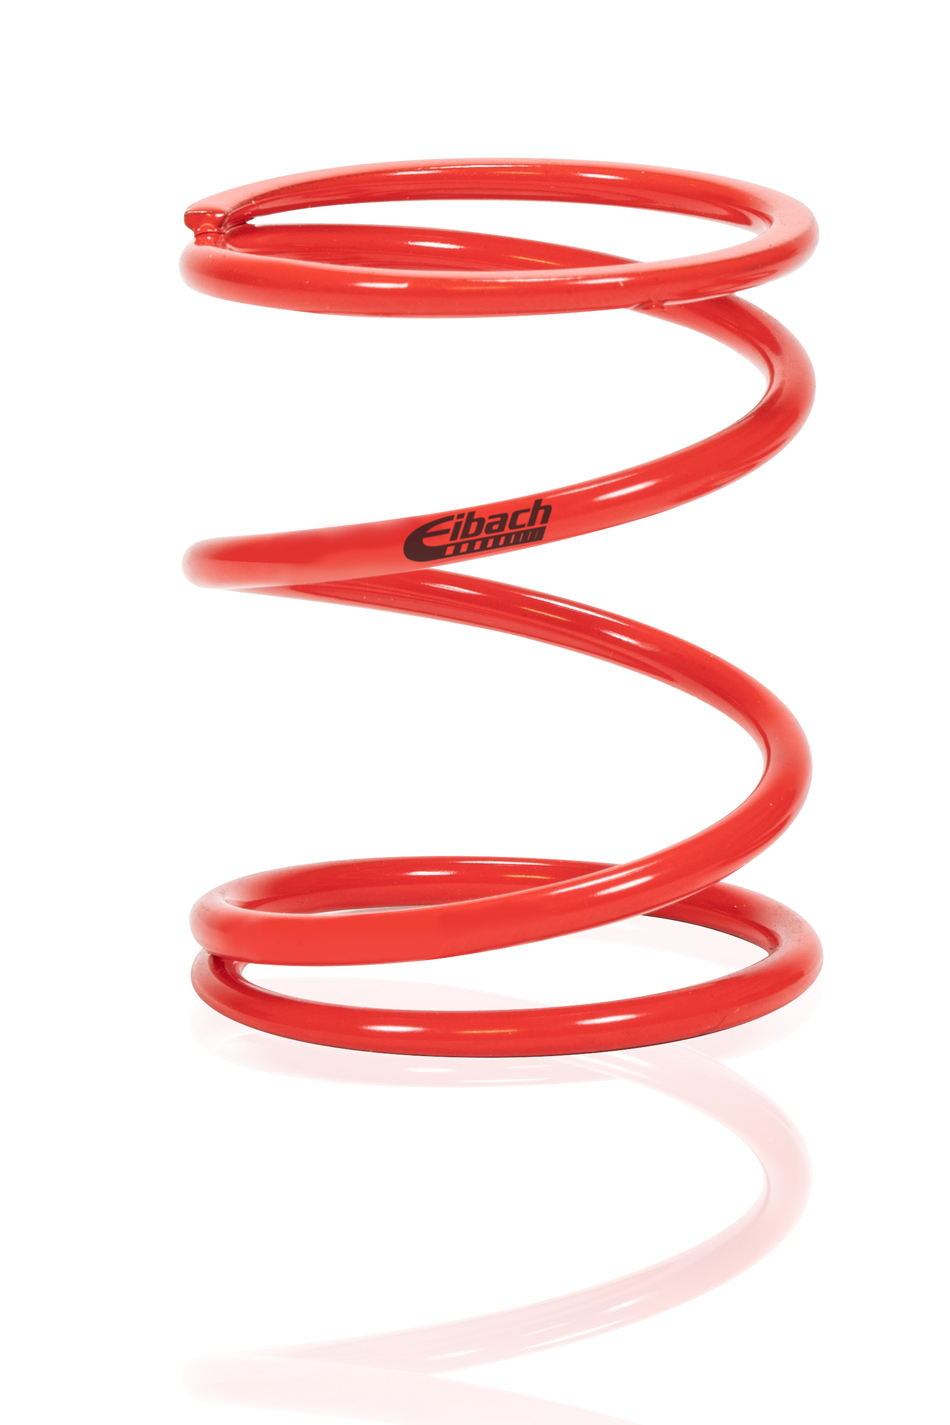 Eibach 0225.200.0050 Coil Spring, Barrel, Coil-Over, 1.360 in ID, 2.2500 in Length, 50 lb/in Spring Rate, Steel, Red Powder Coat, Each